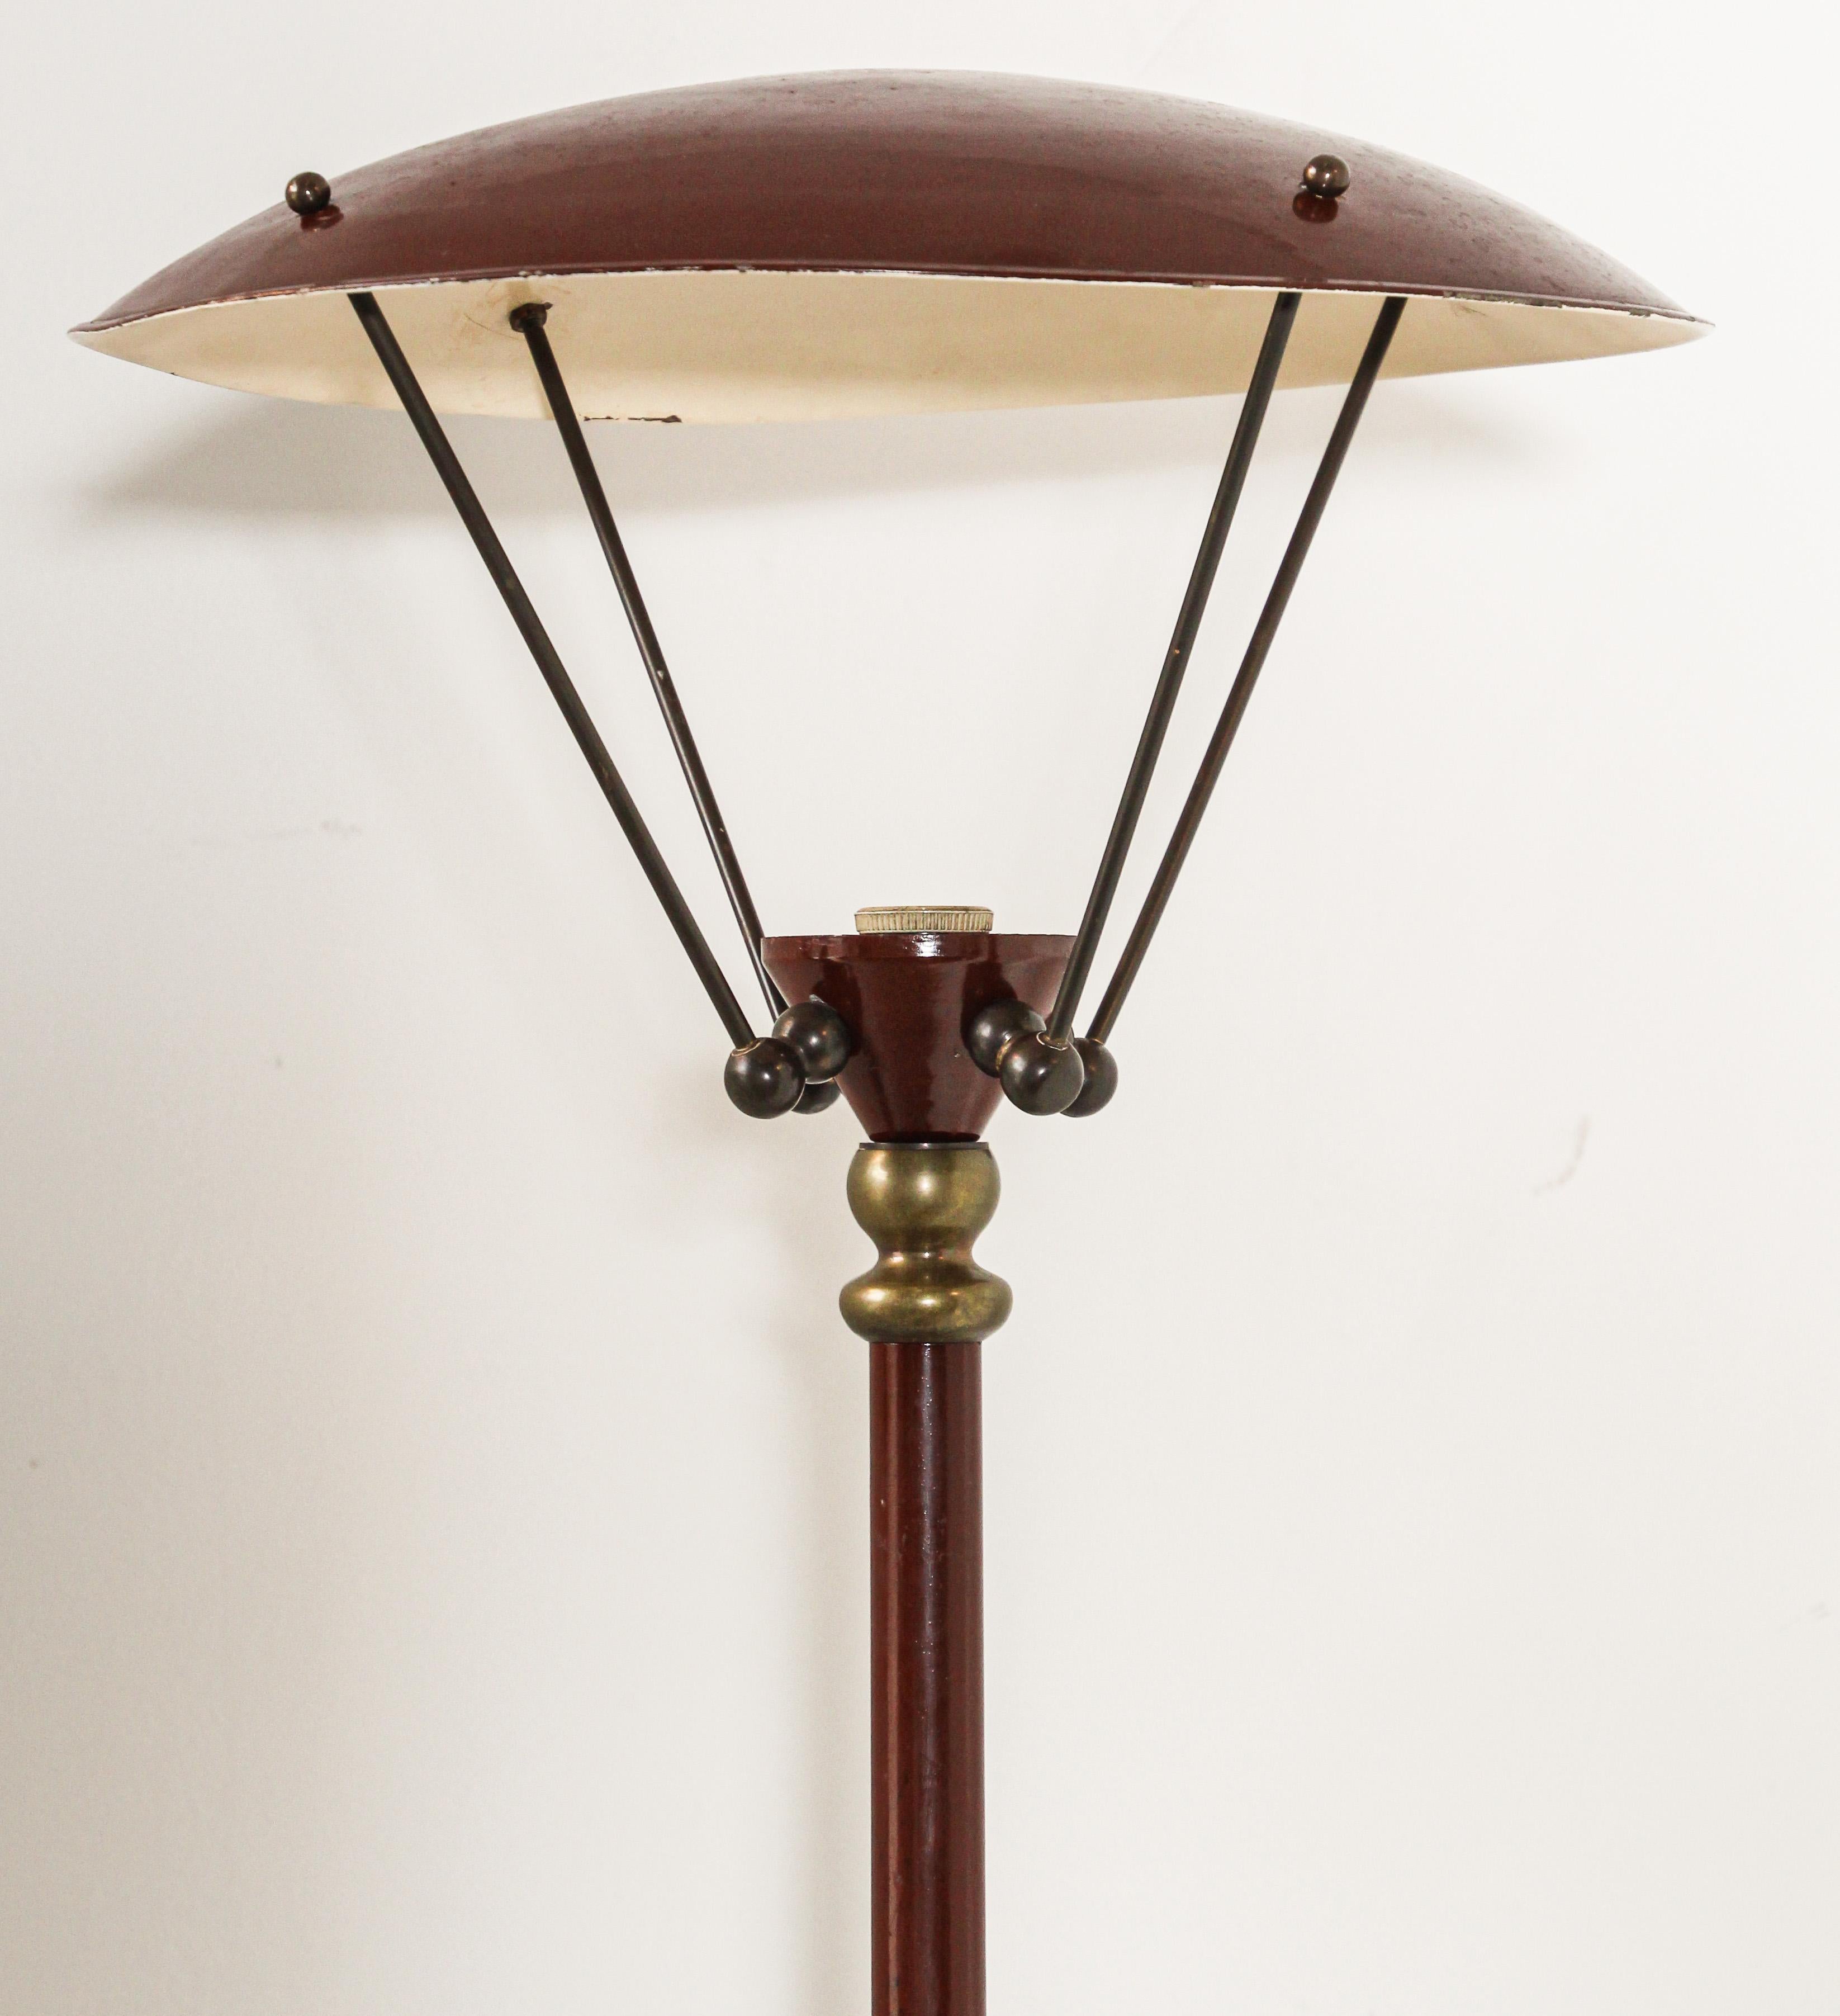 Vintage Sculptural French Tripod Floor Lamp Brown Enamel Shade, 1950s For Sale 4